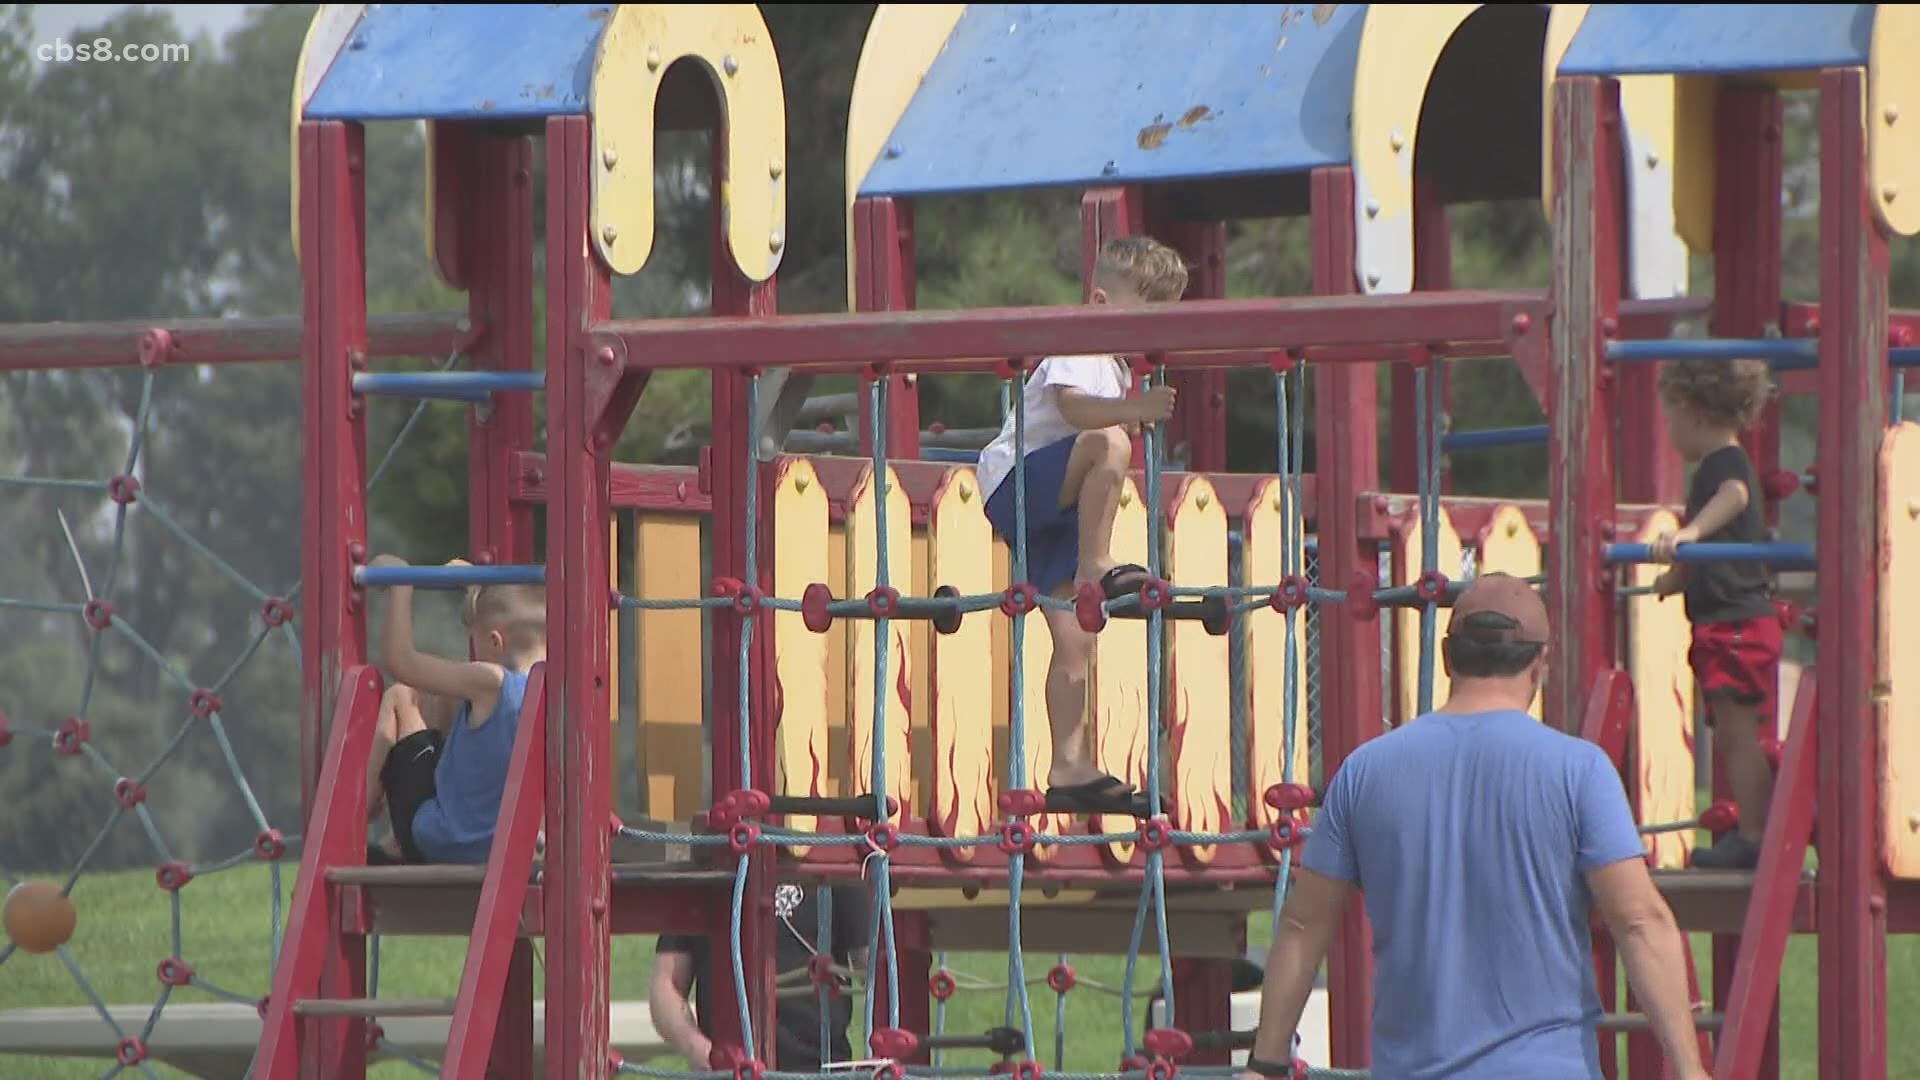 San Diego’s Parks & Rec division says, “Currently, there is no timeline to open the City playgrounds at this time and there is no target date.”